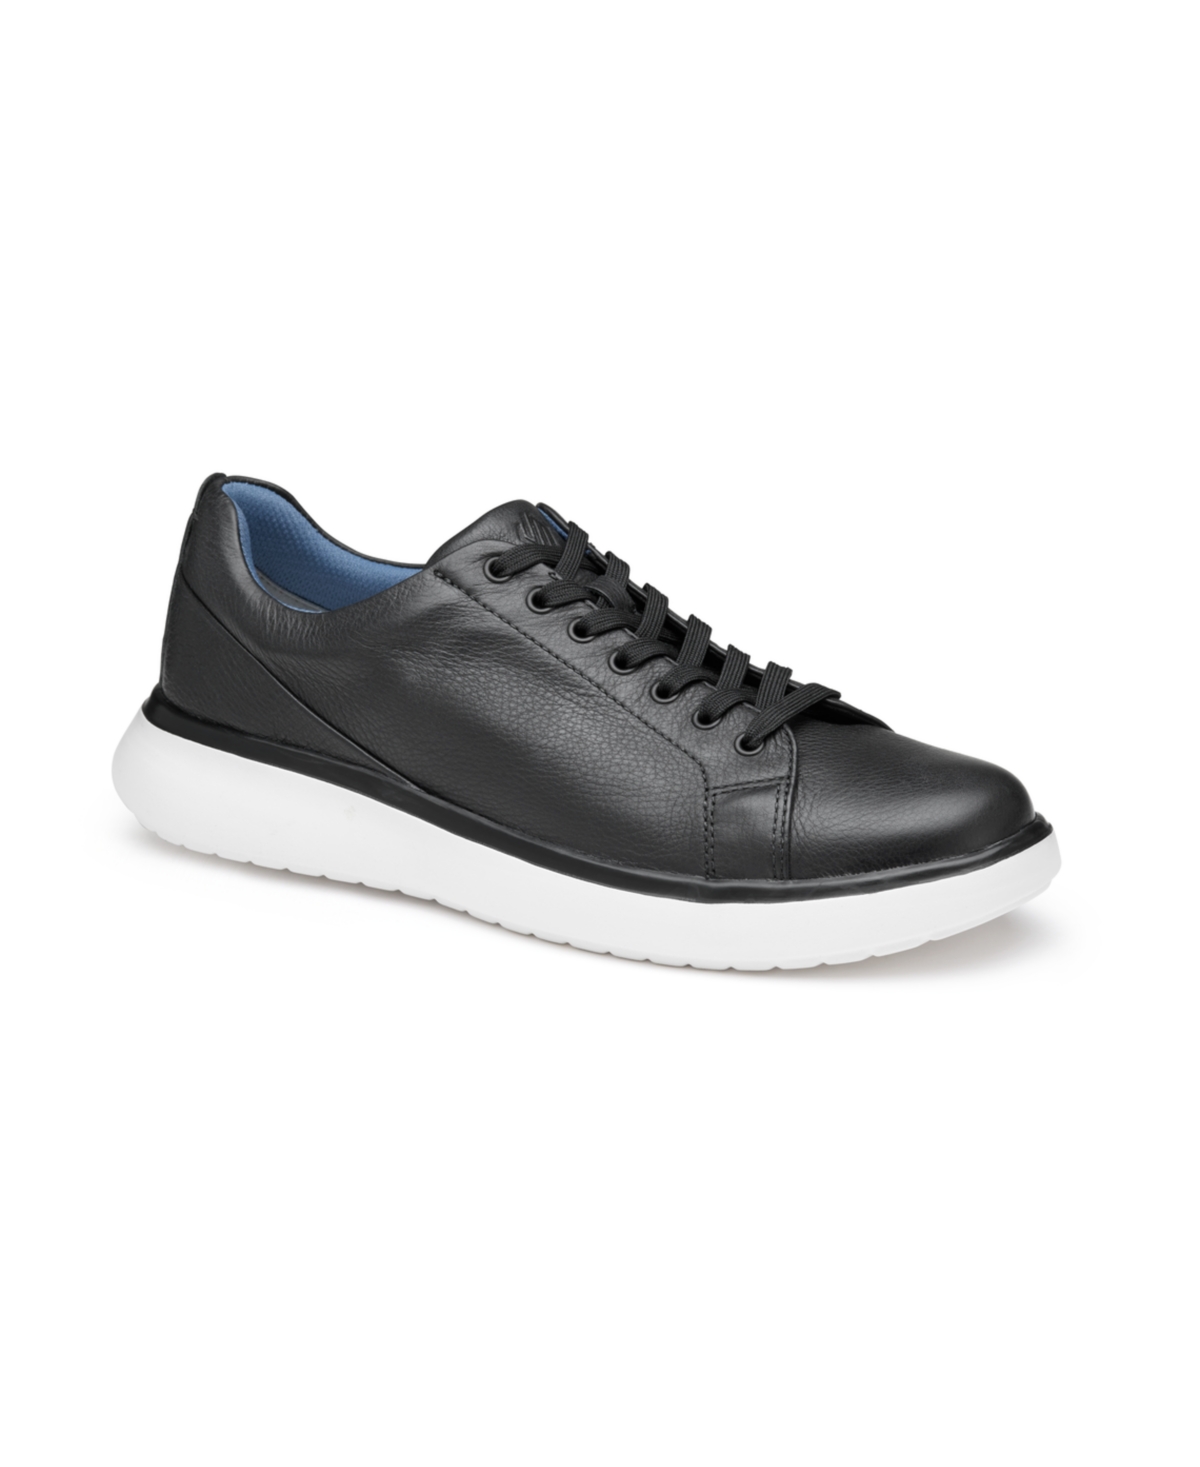 Men's Oasis Lace-To-Toe Sneakers - Black